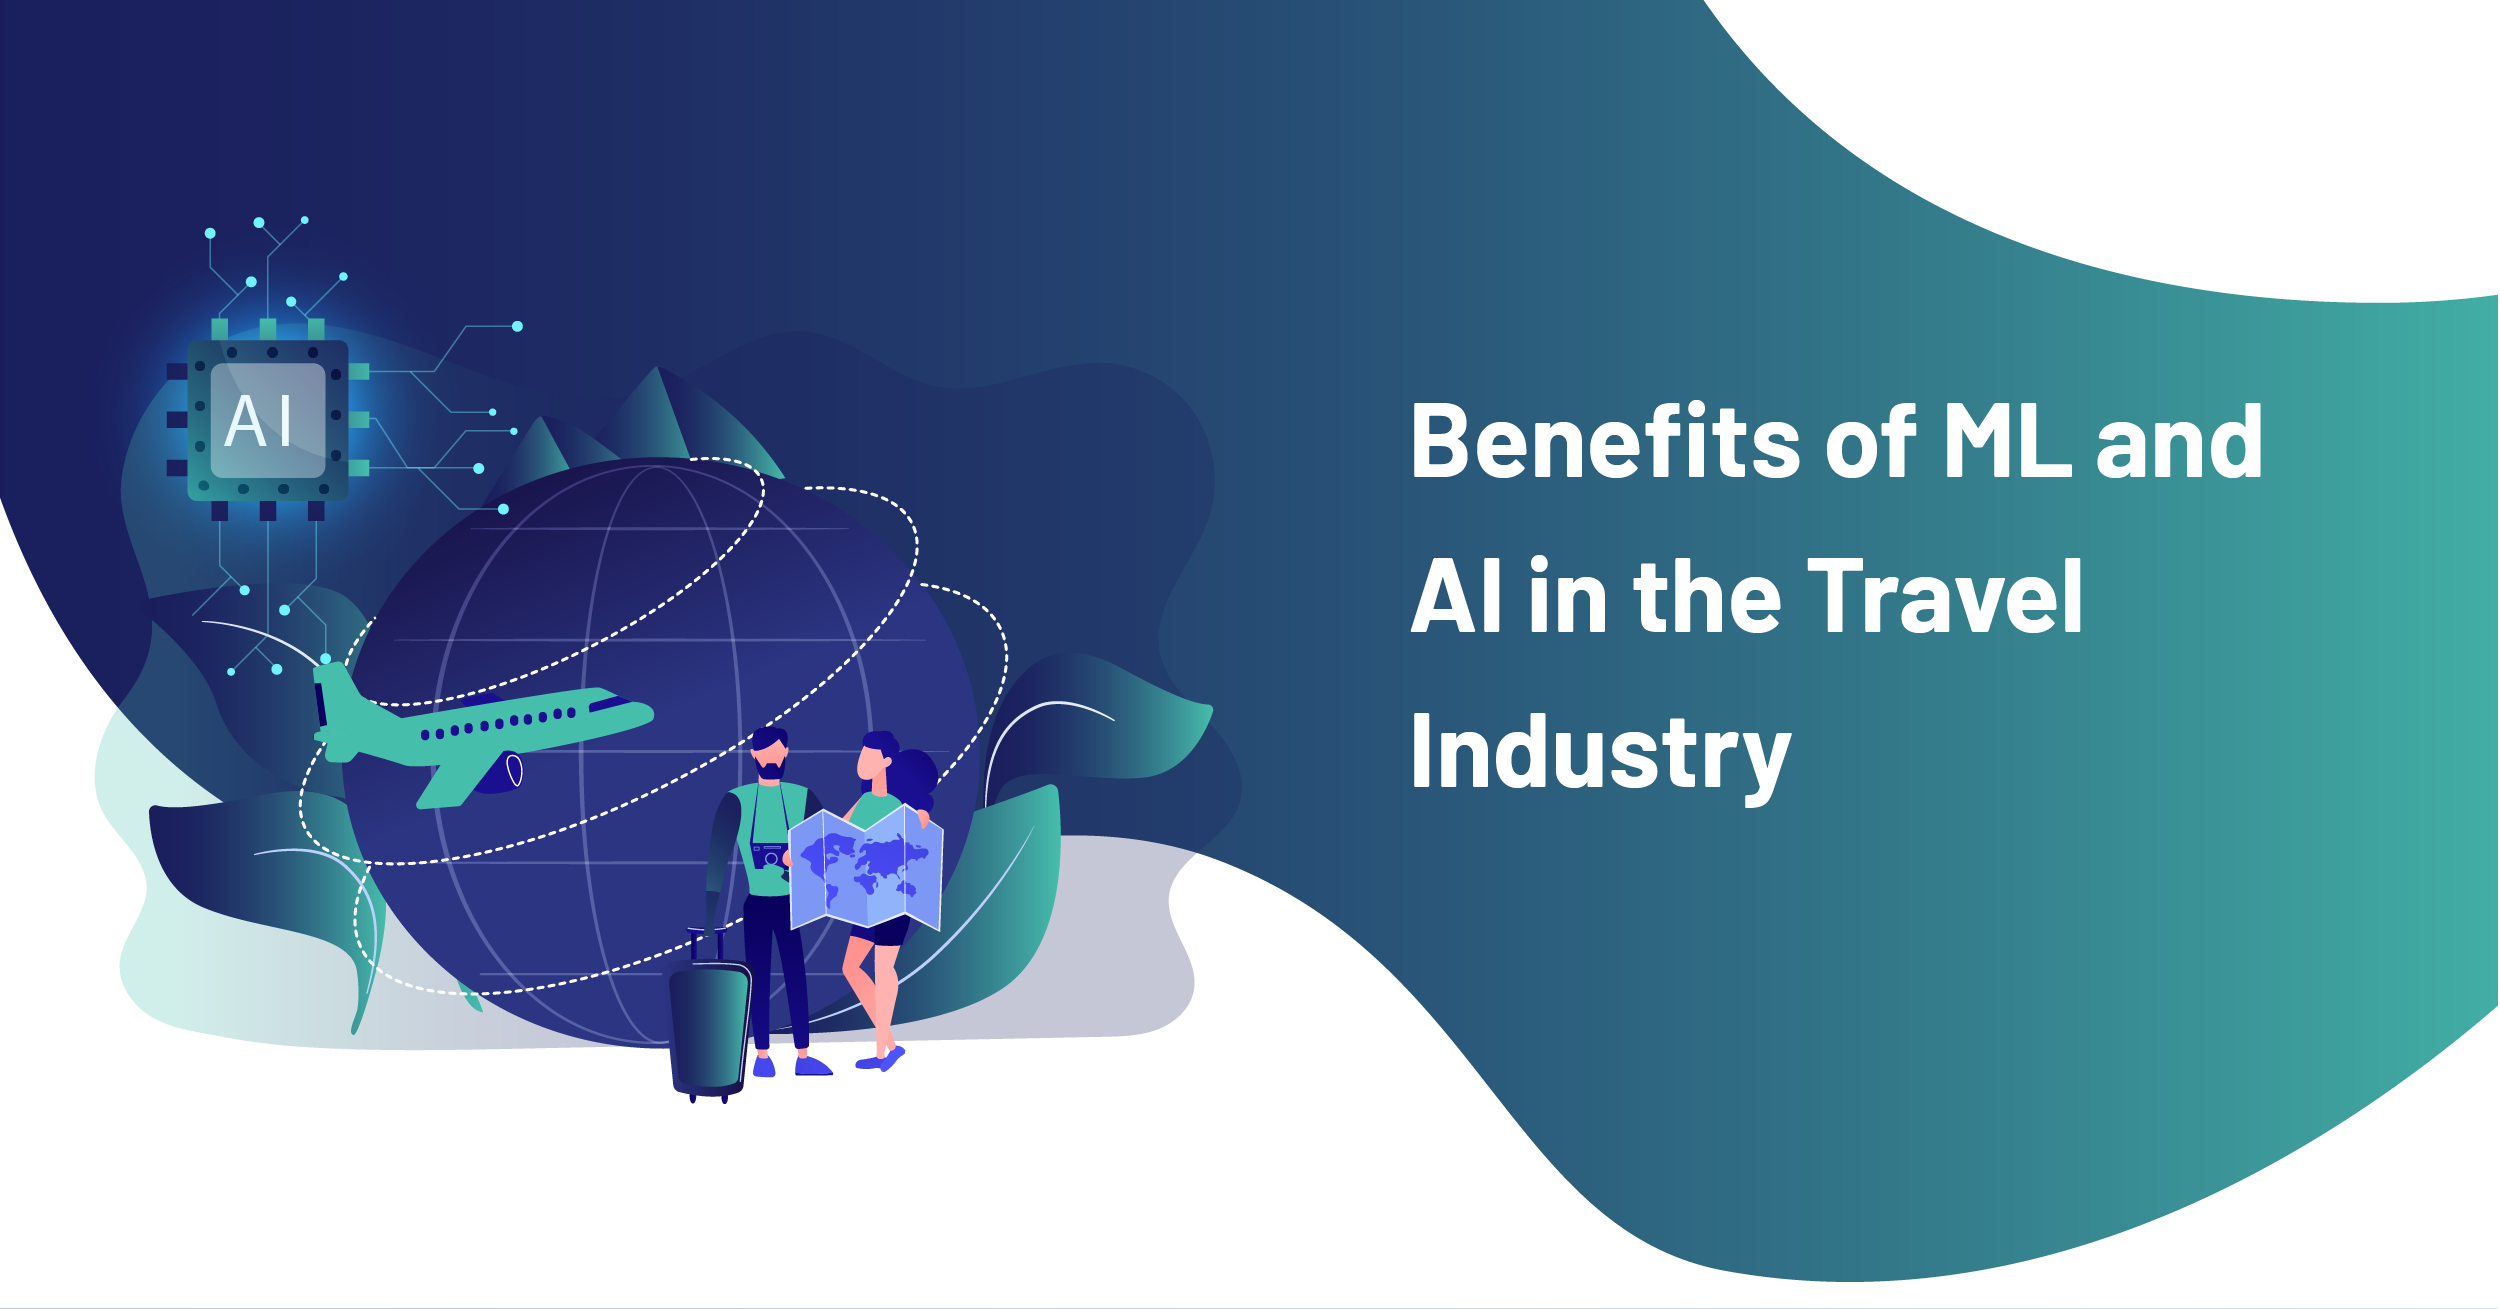 Benefits of the Use of Machine Learning and AI in the Travel Industry